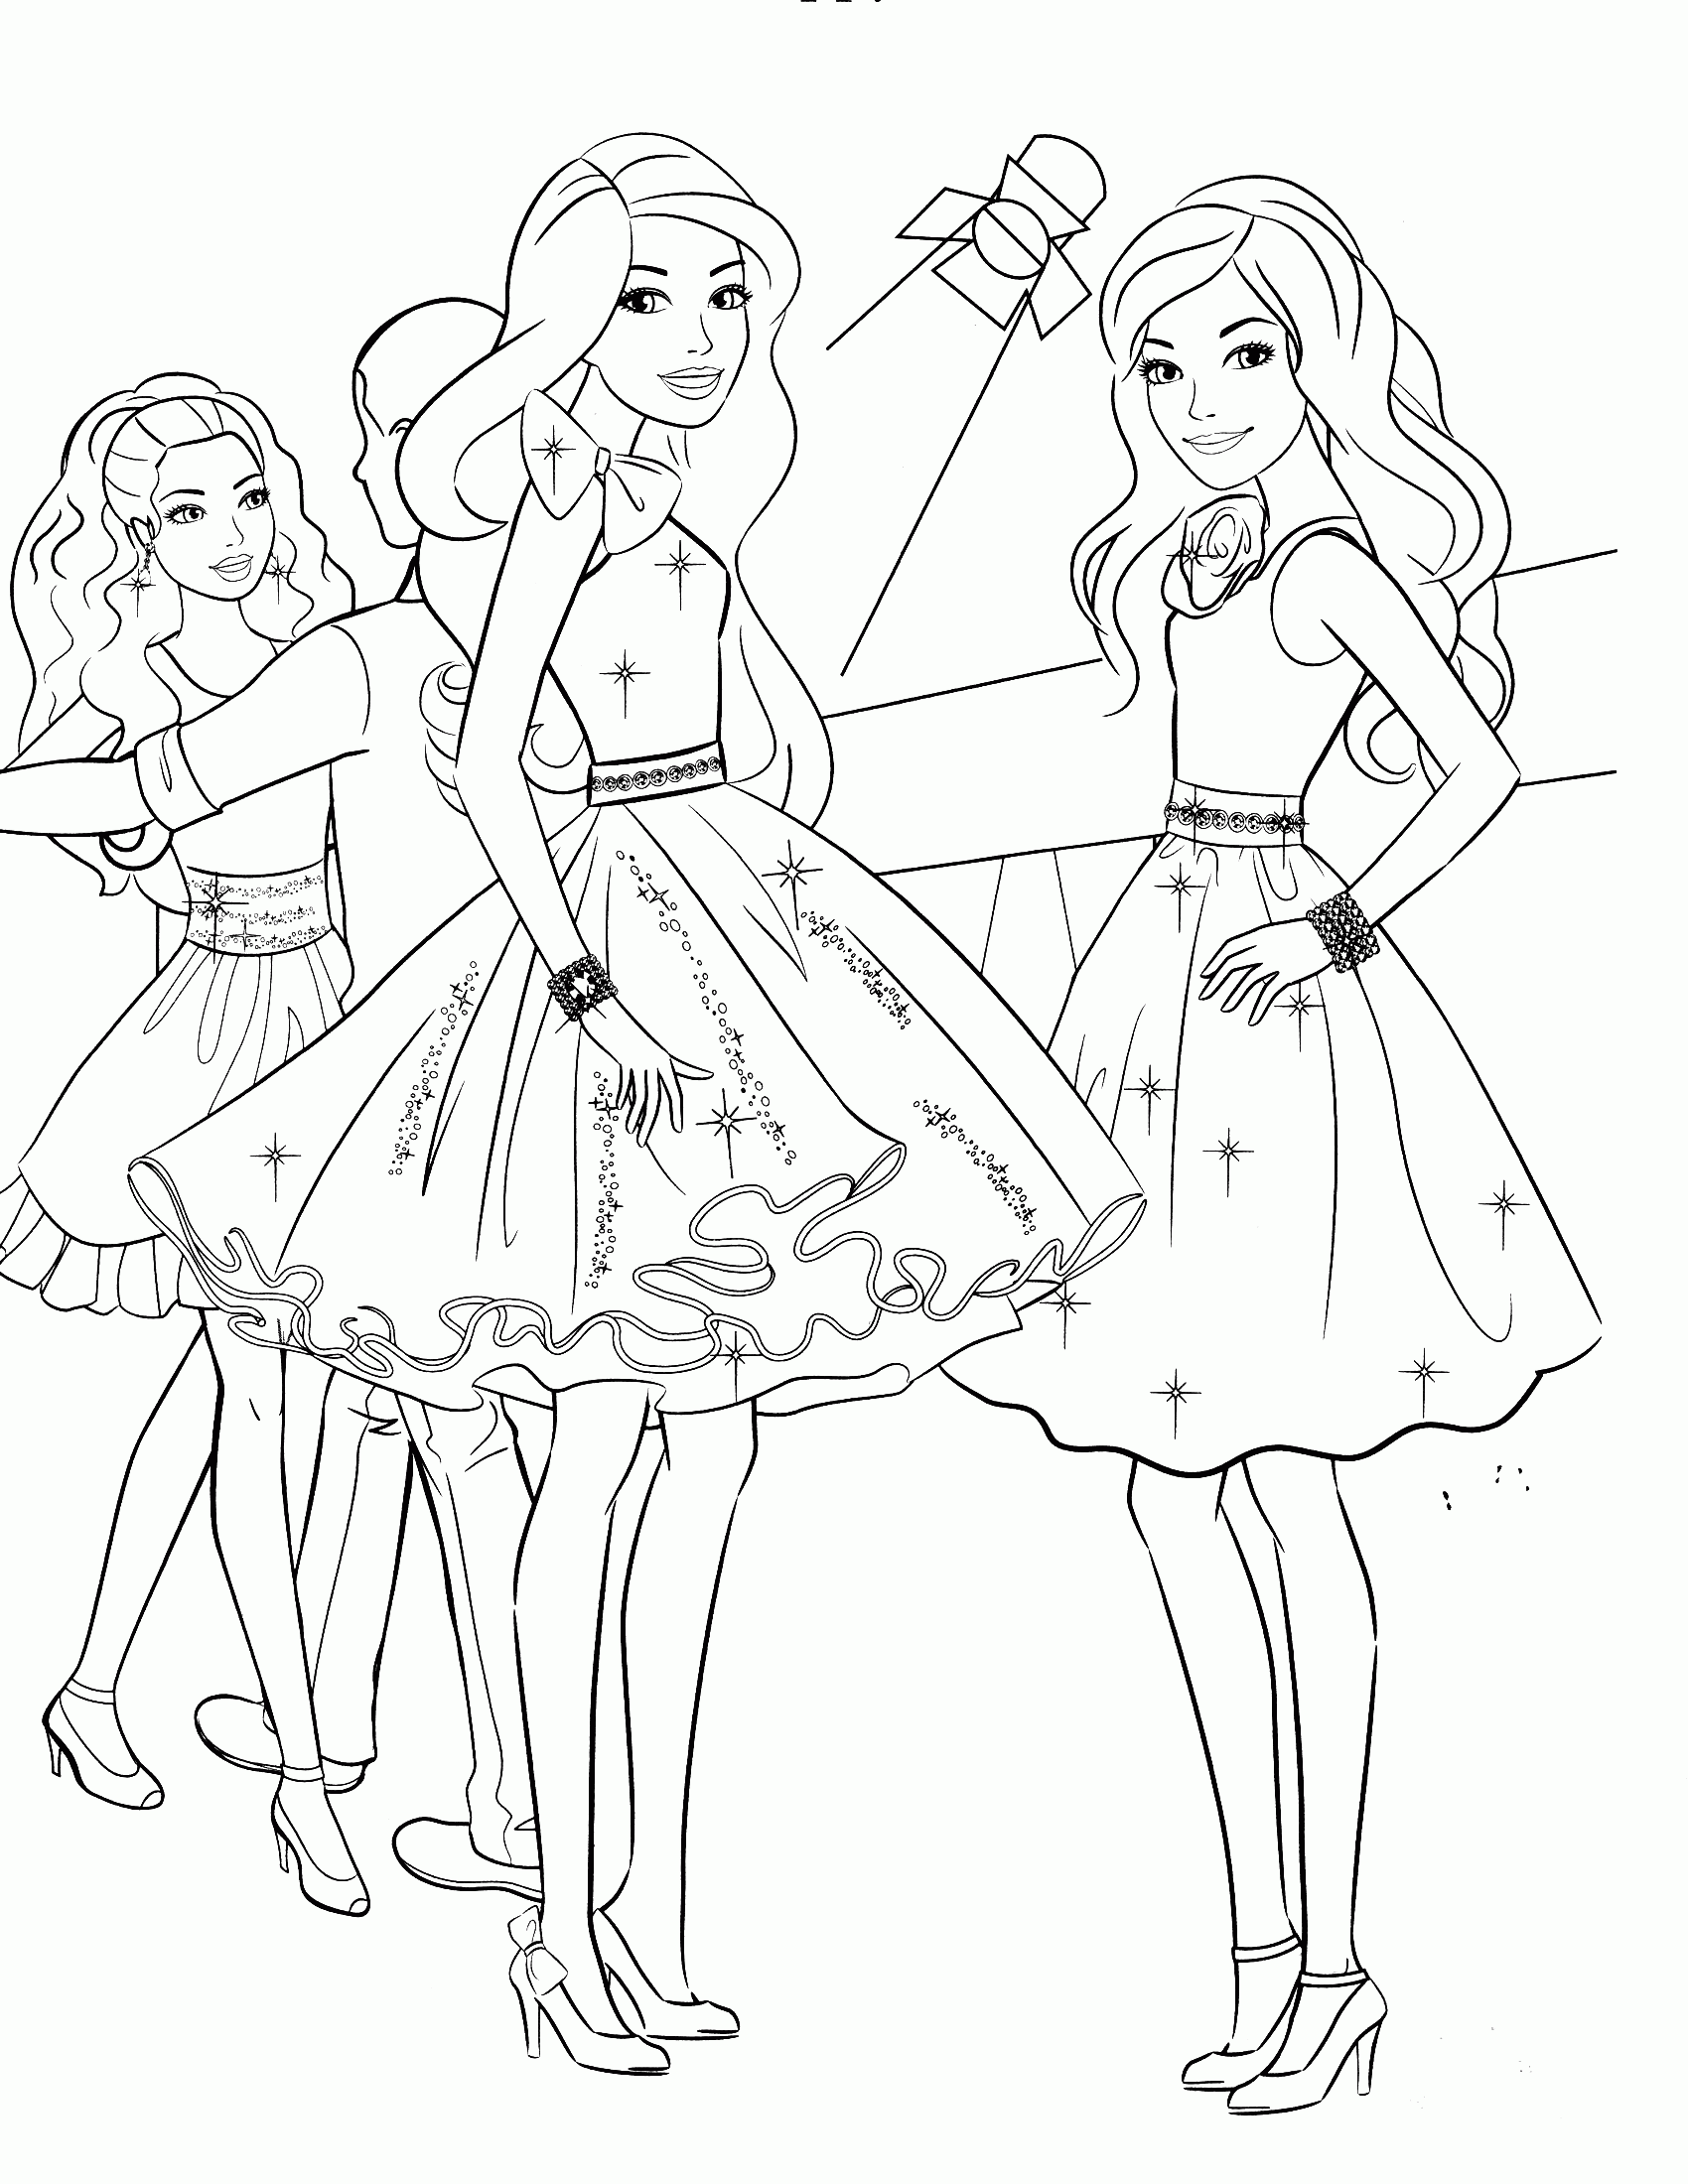 Barbie Fashion Coloring Pages Princess - Coloring Pages For All Ages